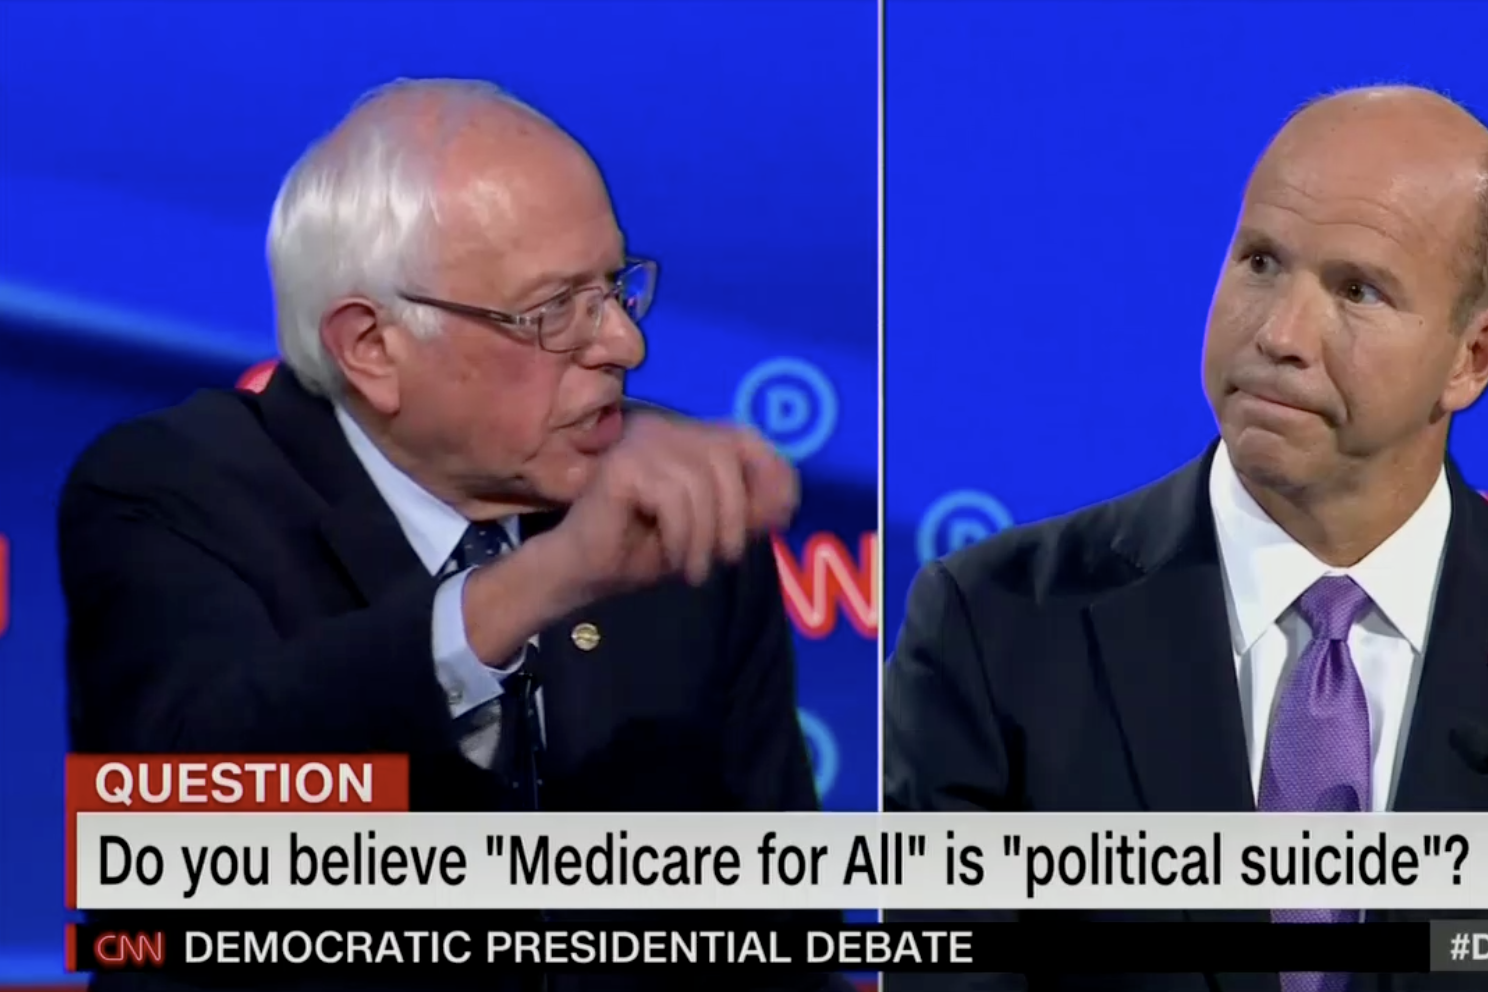 In this screengrab from CNN, Bernie Sanders and Tom Delaney argue. The banner reads: “Do you believe ‘Medicare for All’ is ‘political suicide’ ?”